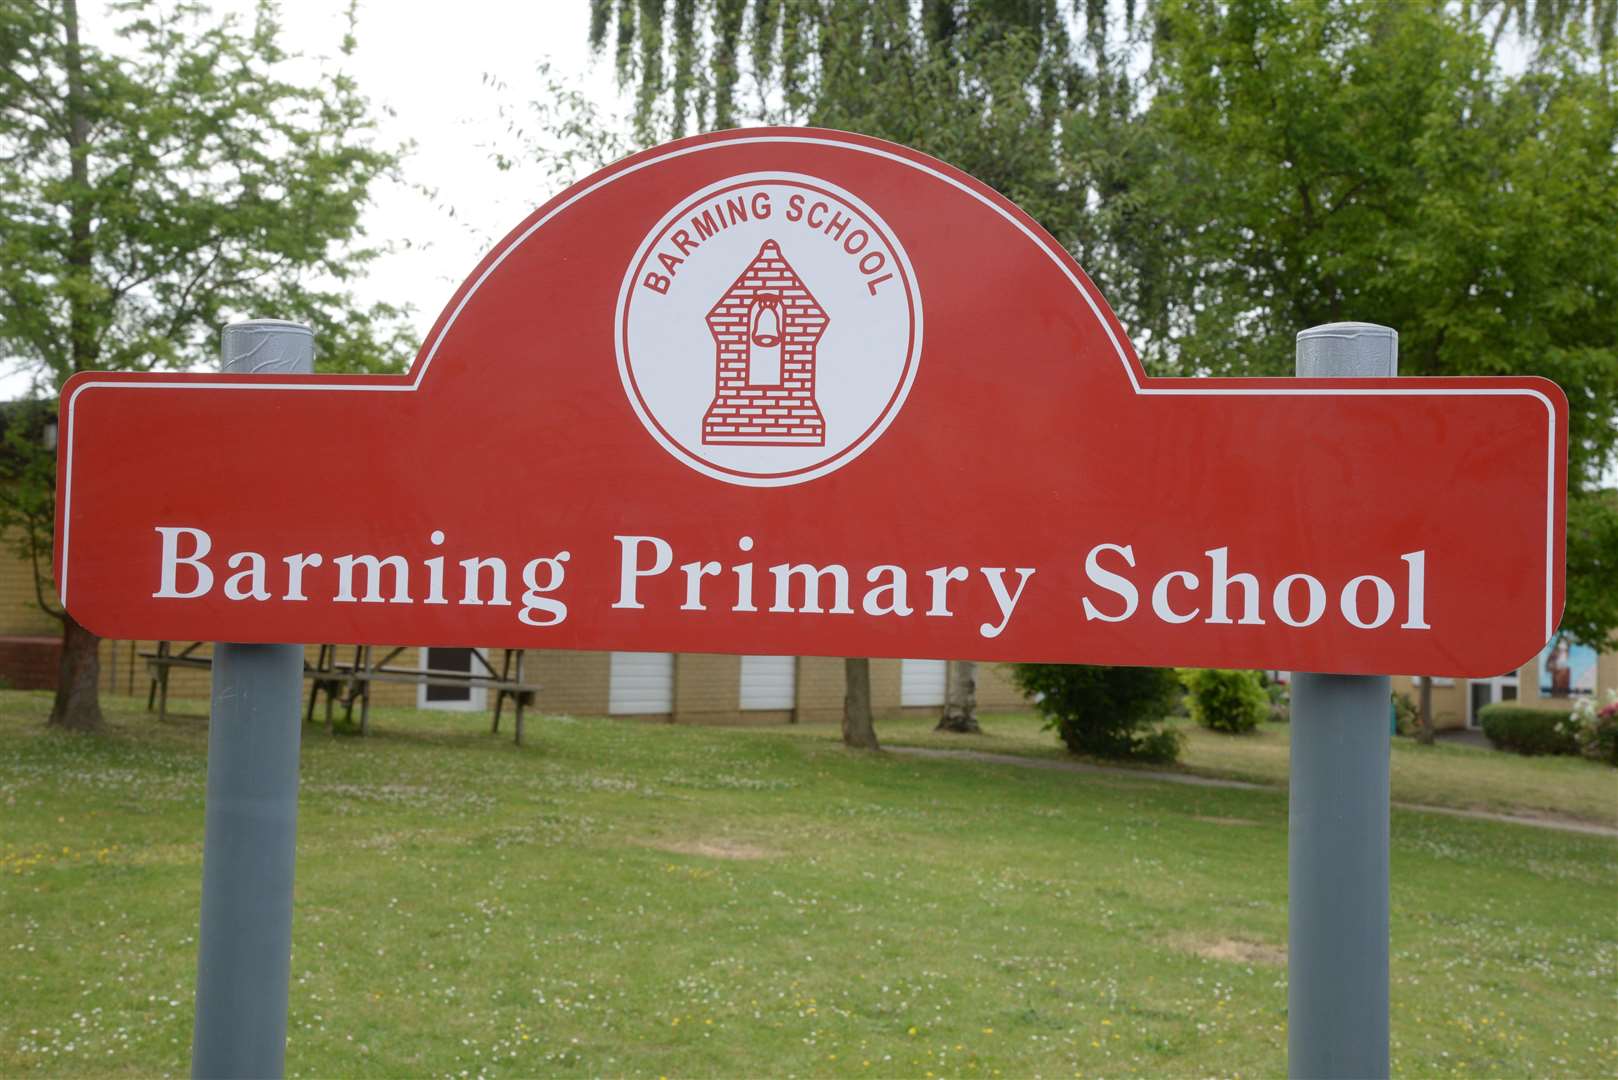 Barming Primary School has sent some children home